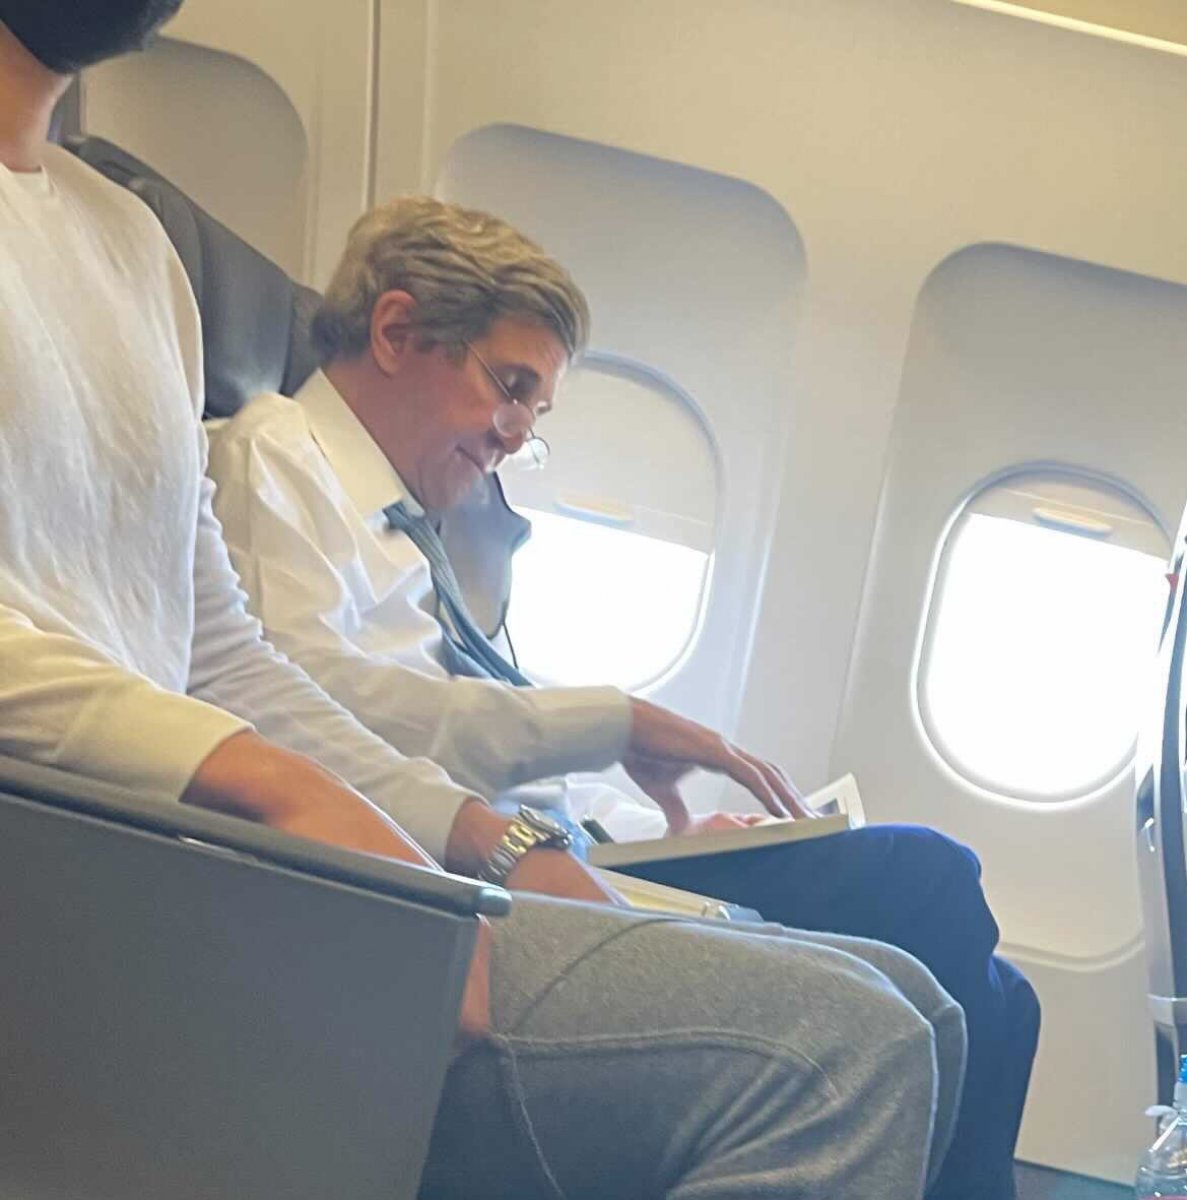 John Kerry spotted on plane without mask #2